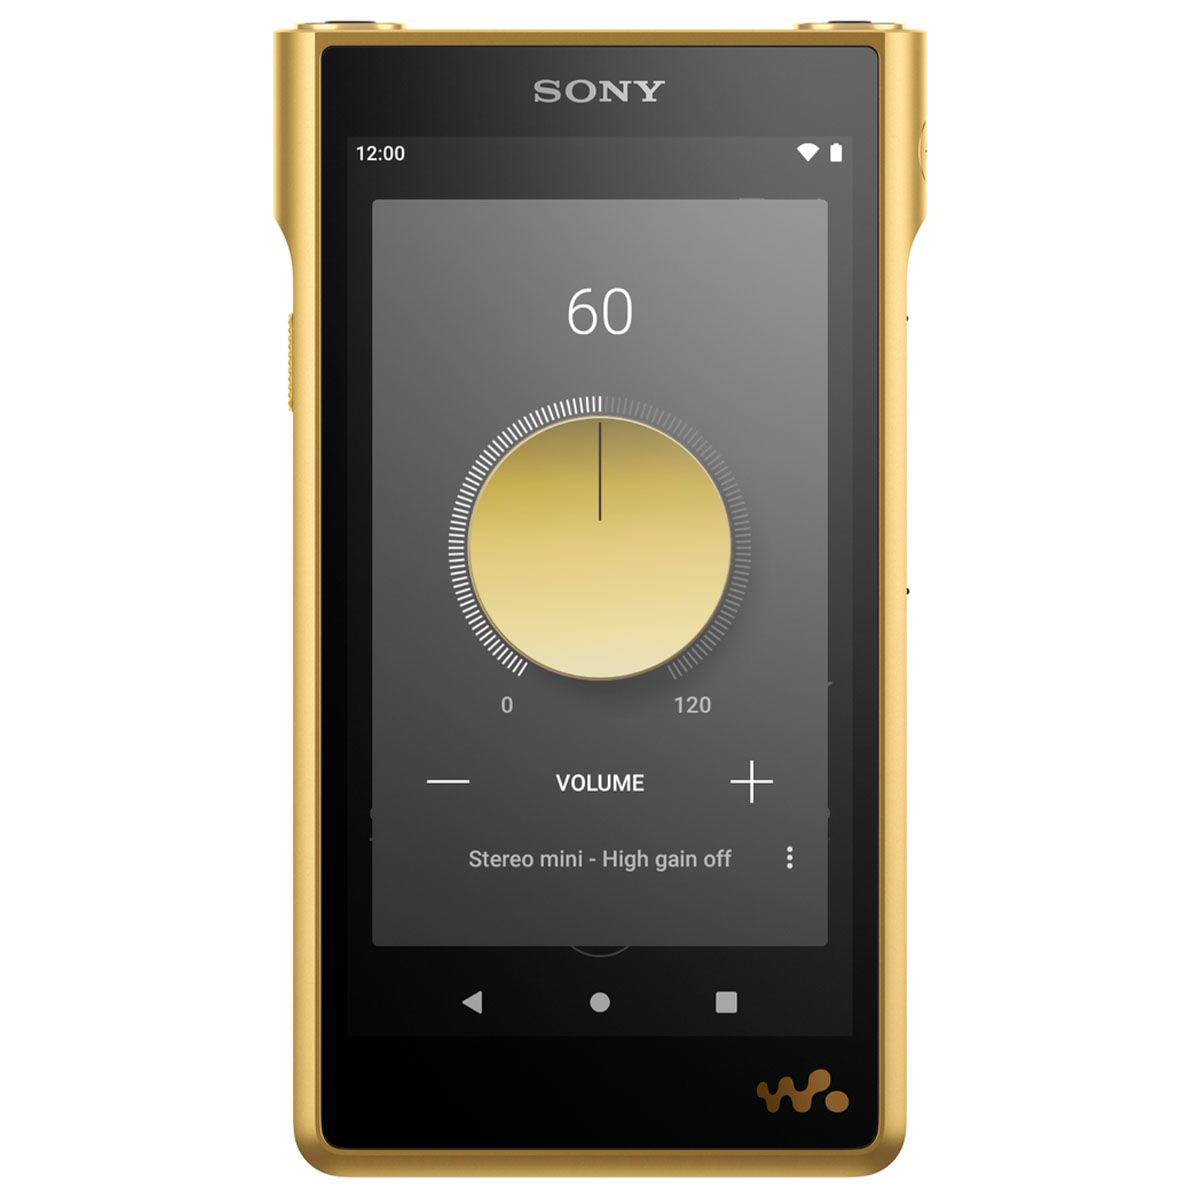 Sony Walkman WM1ZM2 - Signature Series Digital Player - Android 11 - front view showing volume control